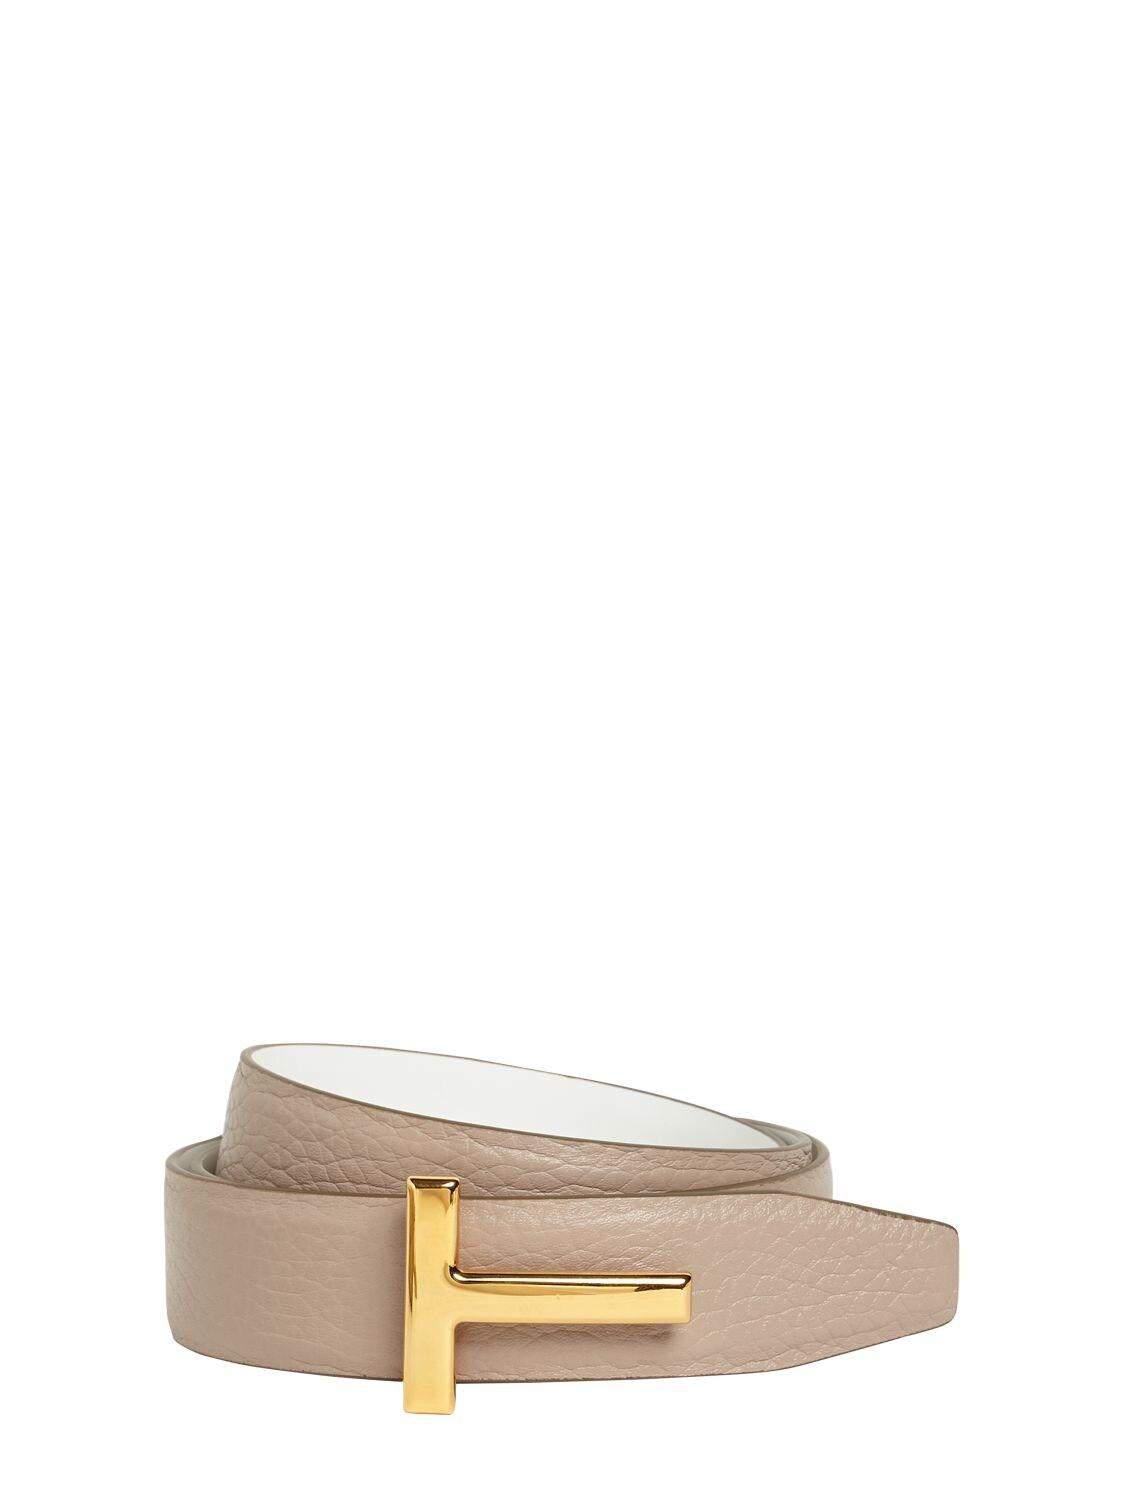 Tom Ford 3cm Tf Reversible Leather Belt in Taupe/White (Natural) - Lyst